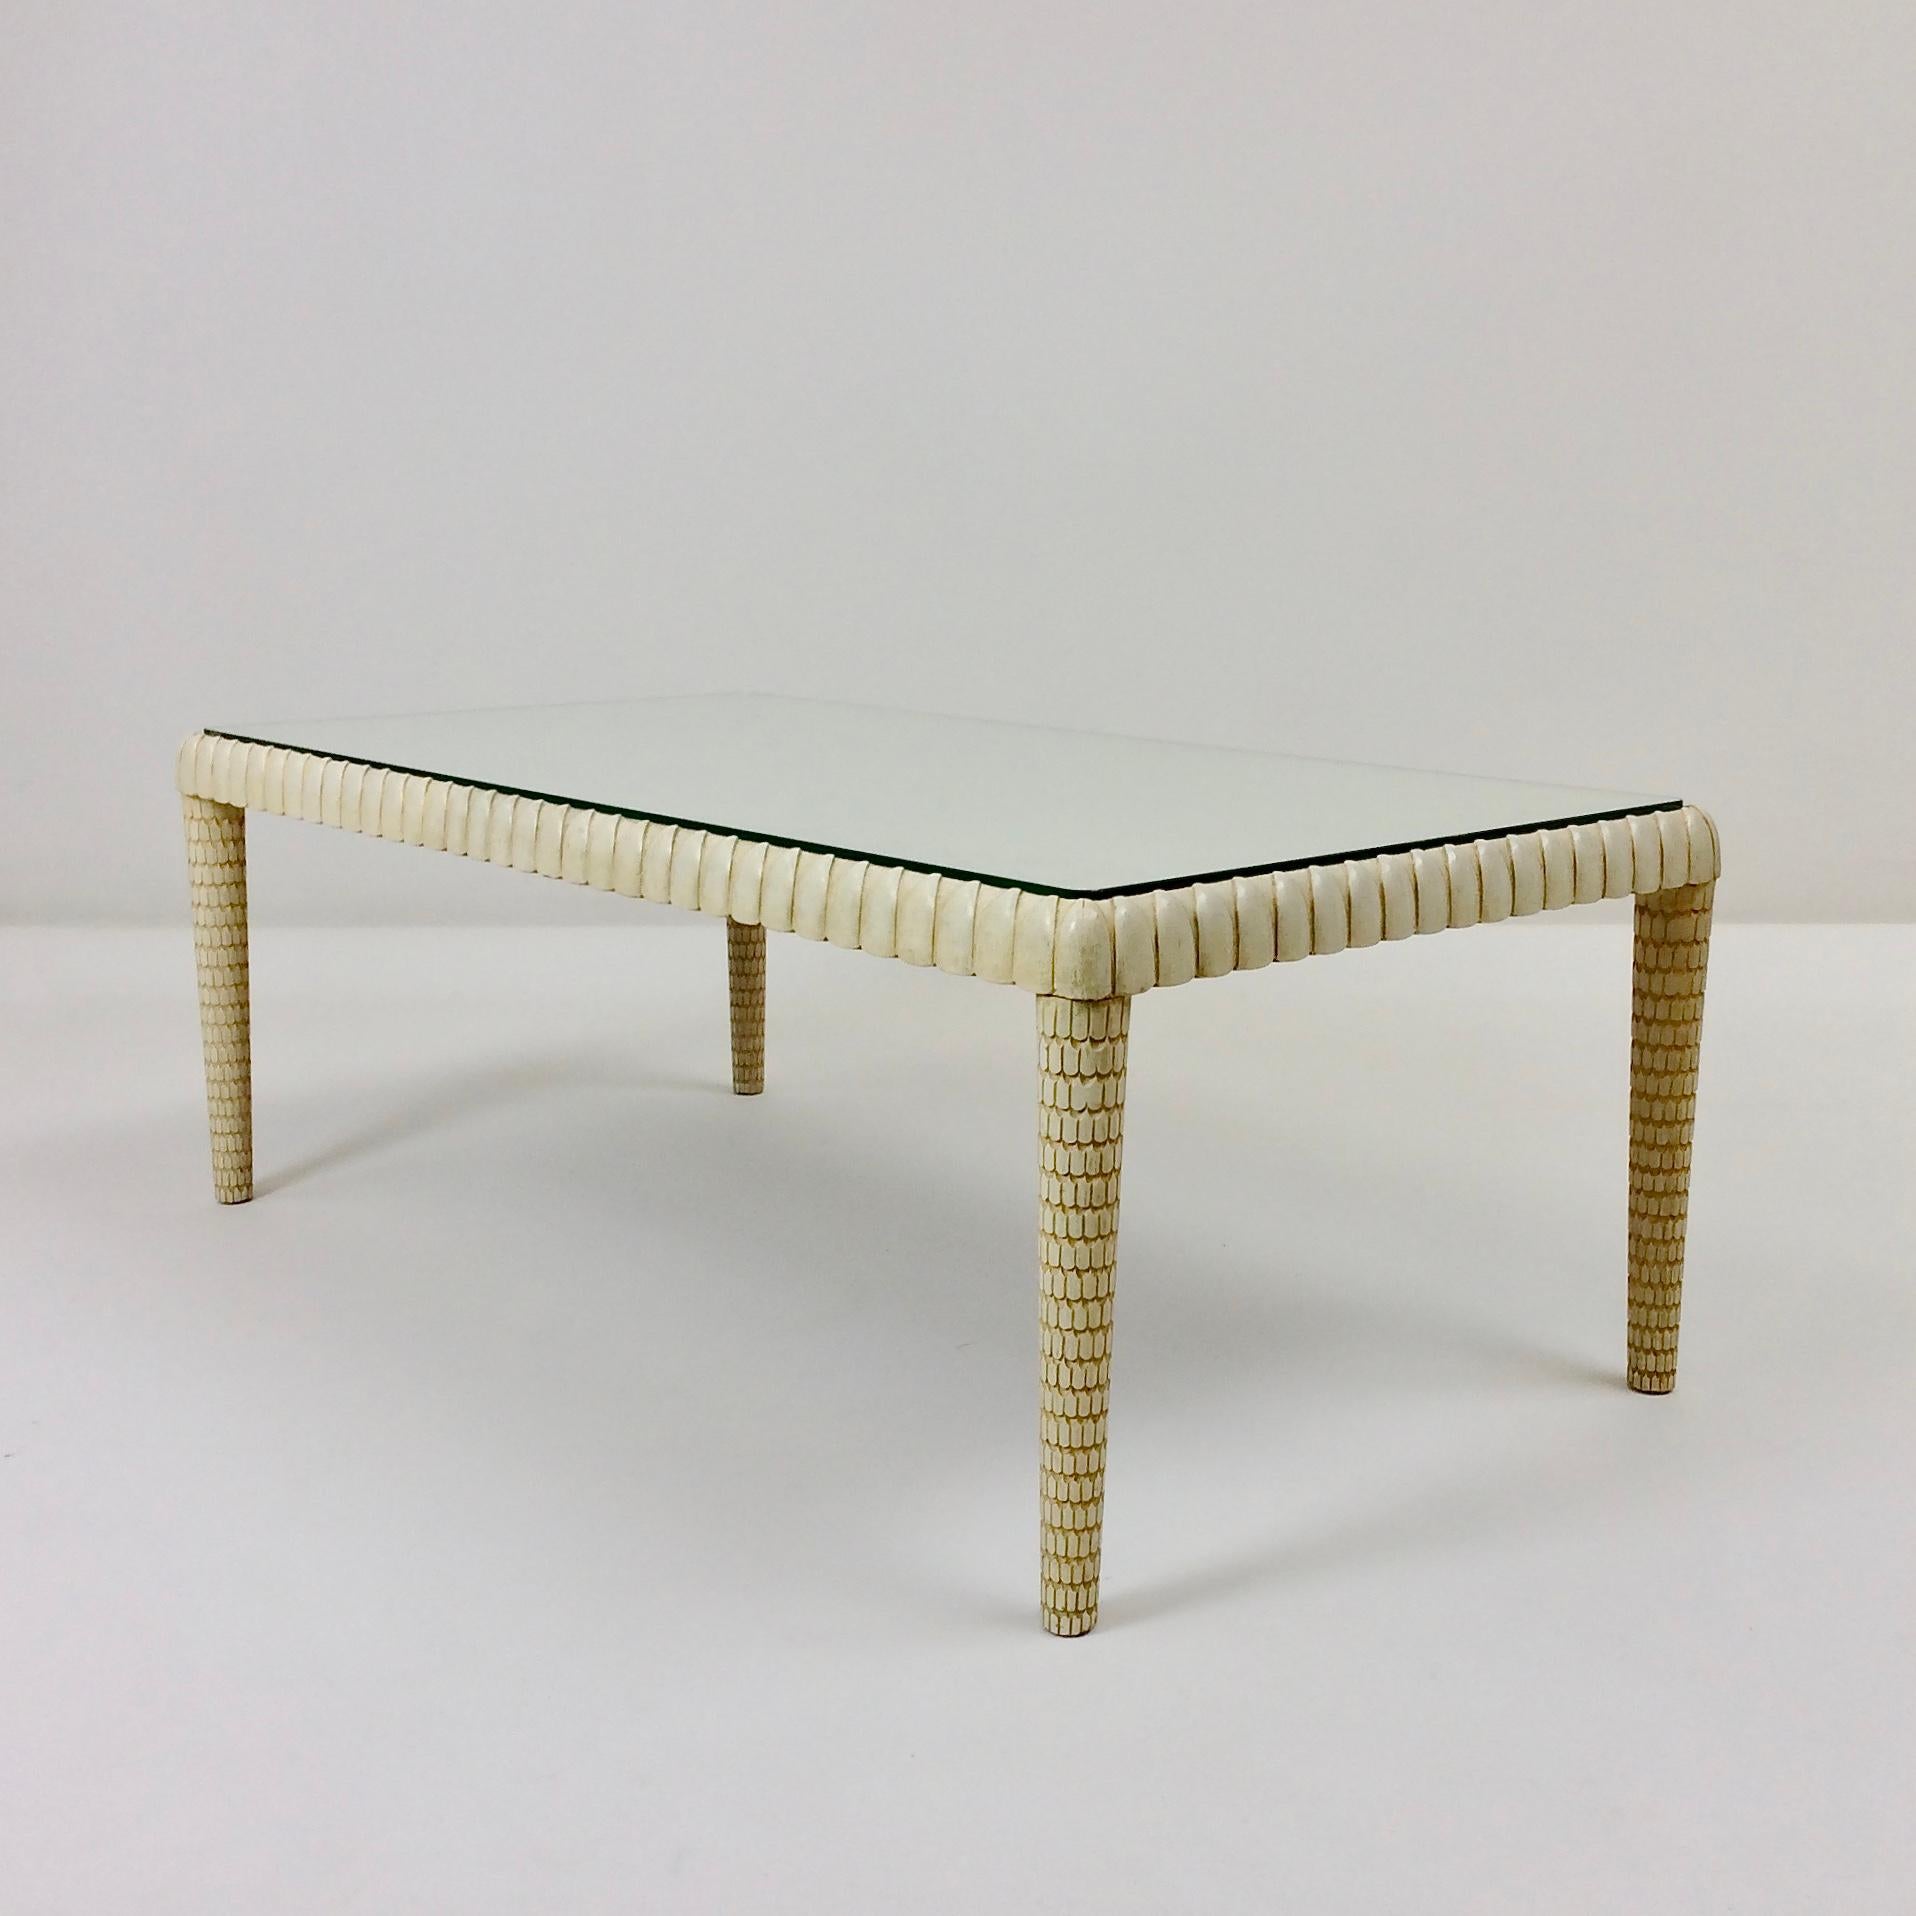 Rare Osvaldo Borsani coffee table edited by Arredamenti Borsani Varedo Milano, circa 1940, Italy.
Ivory painted carved wood, clear glass top.
Signed with applied metal manufacturer's label underside.
Dimensions: 100 cm W, 55 cm D, 38 cm H.
Collector